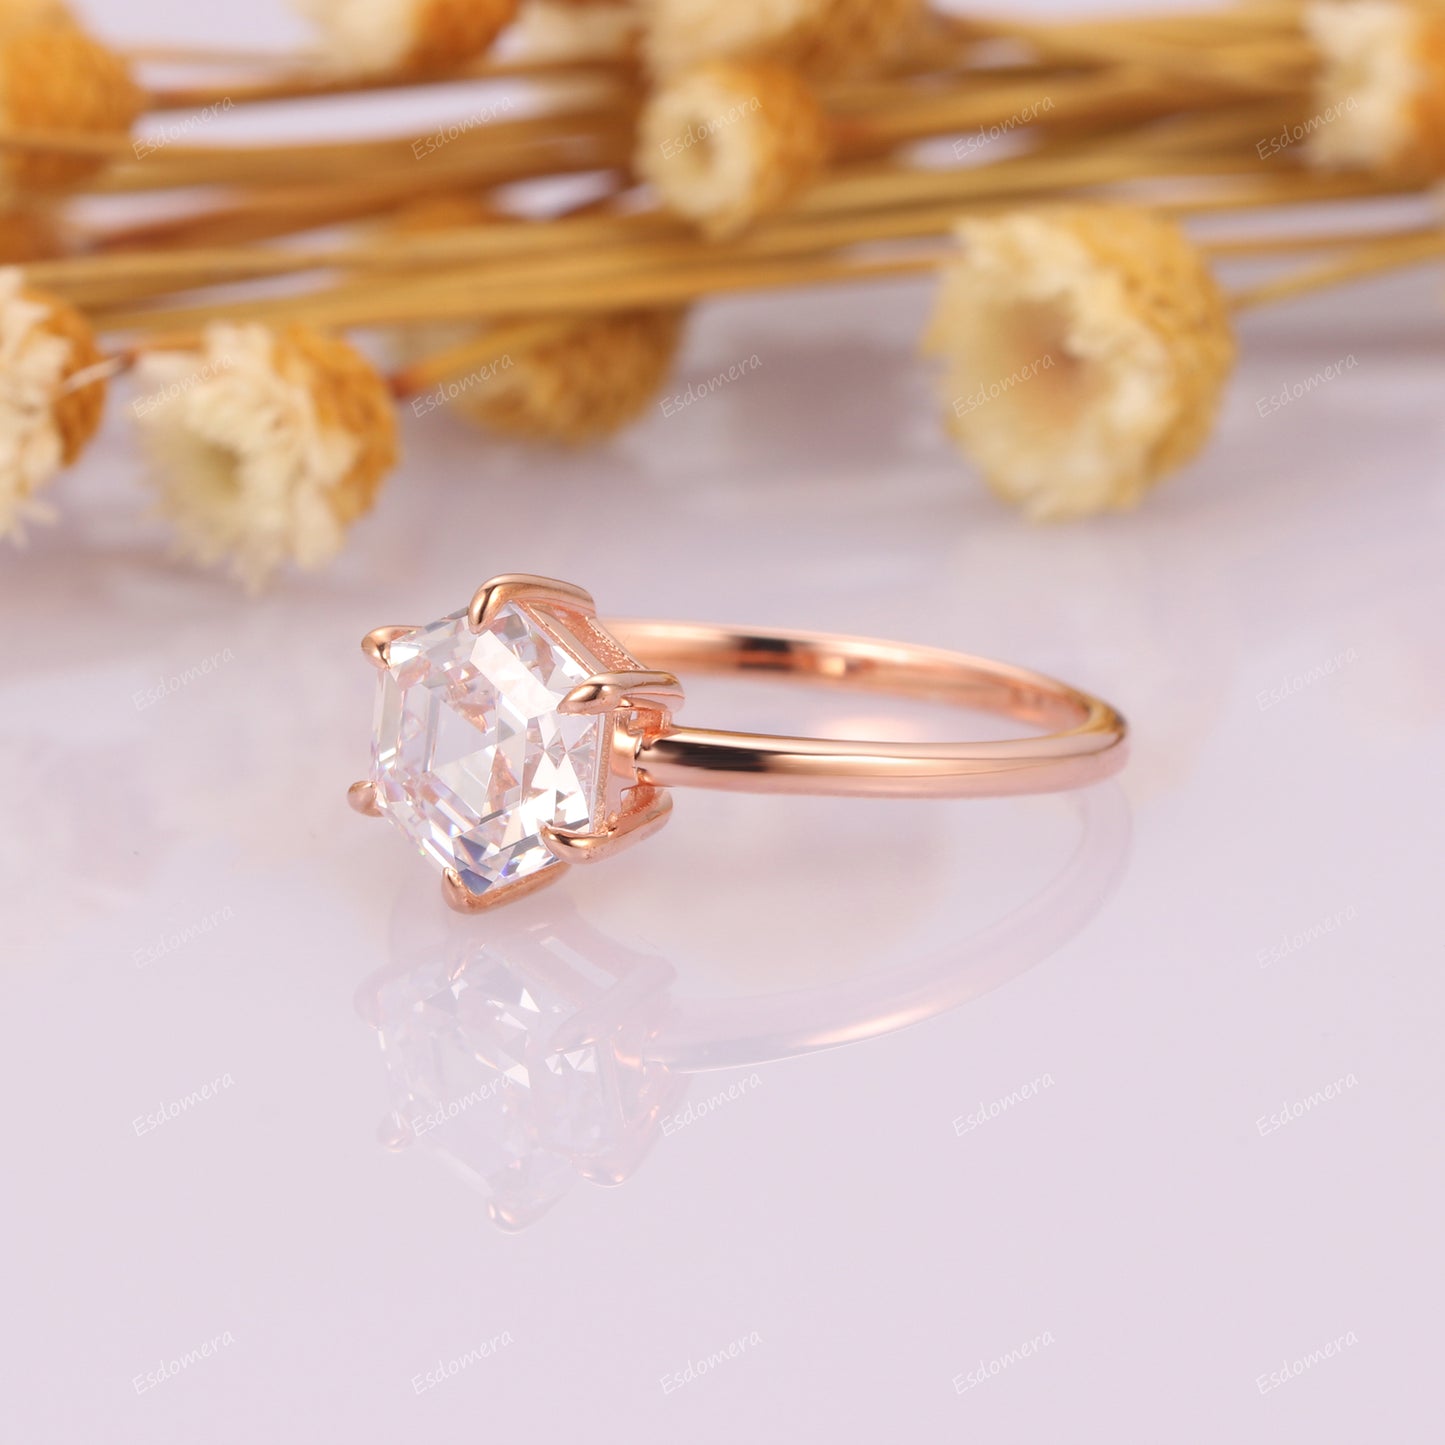 Unique Hexagon Cut 7mm Moissanite Solitaire Ring, Birthday Gift For Women, 14k Rose Gold Plain Band Engagement Ring